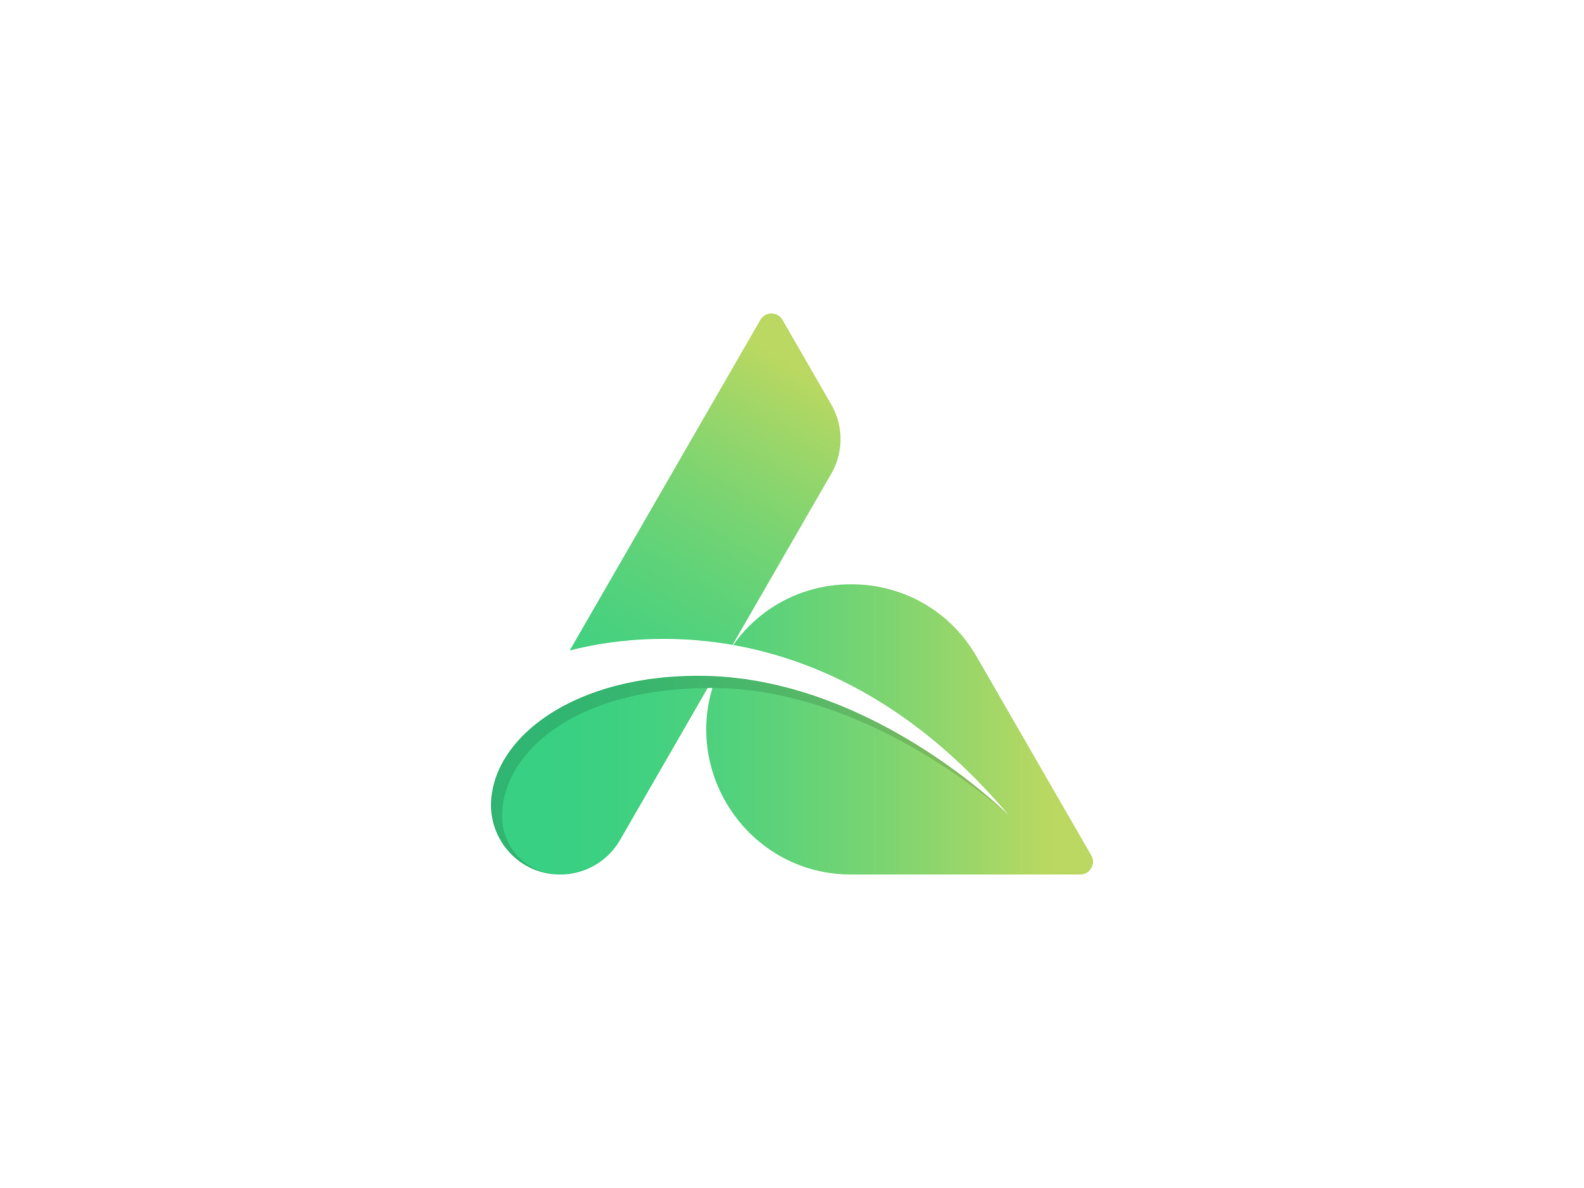 A + Leaf by asif iqbal | logo and branding expert on Dribbble